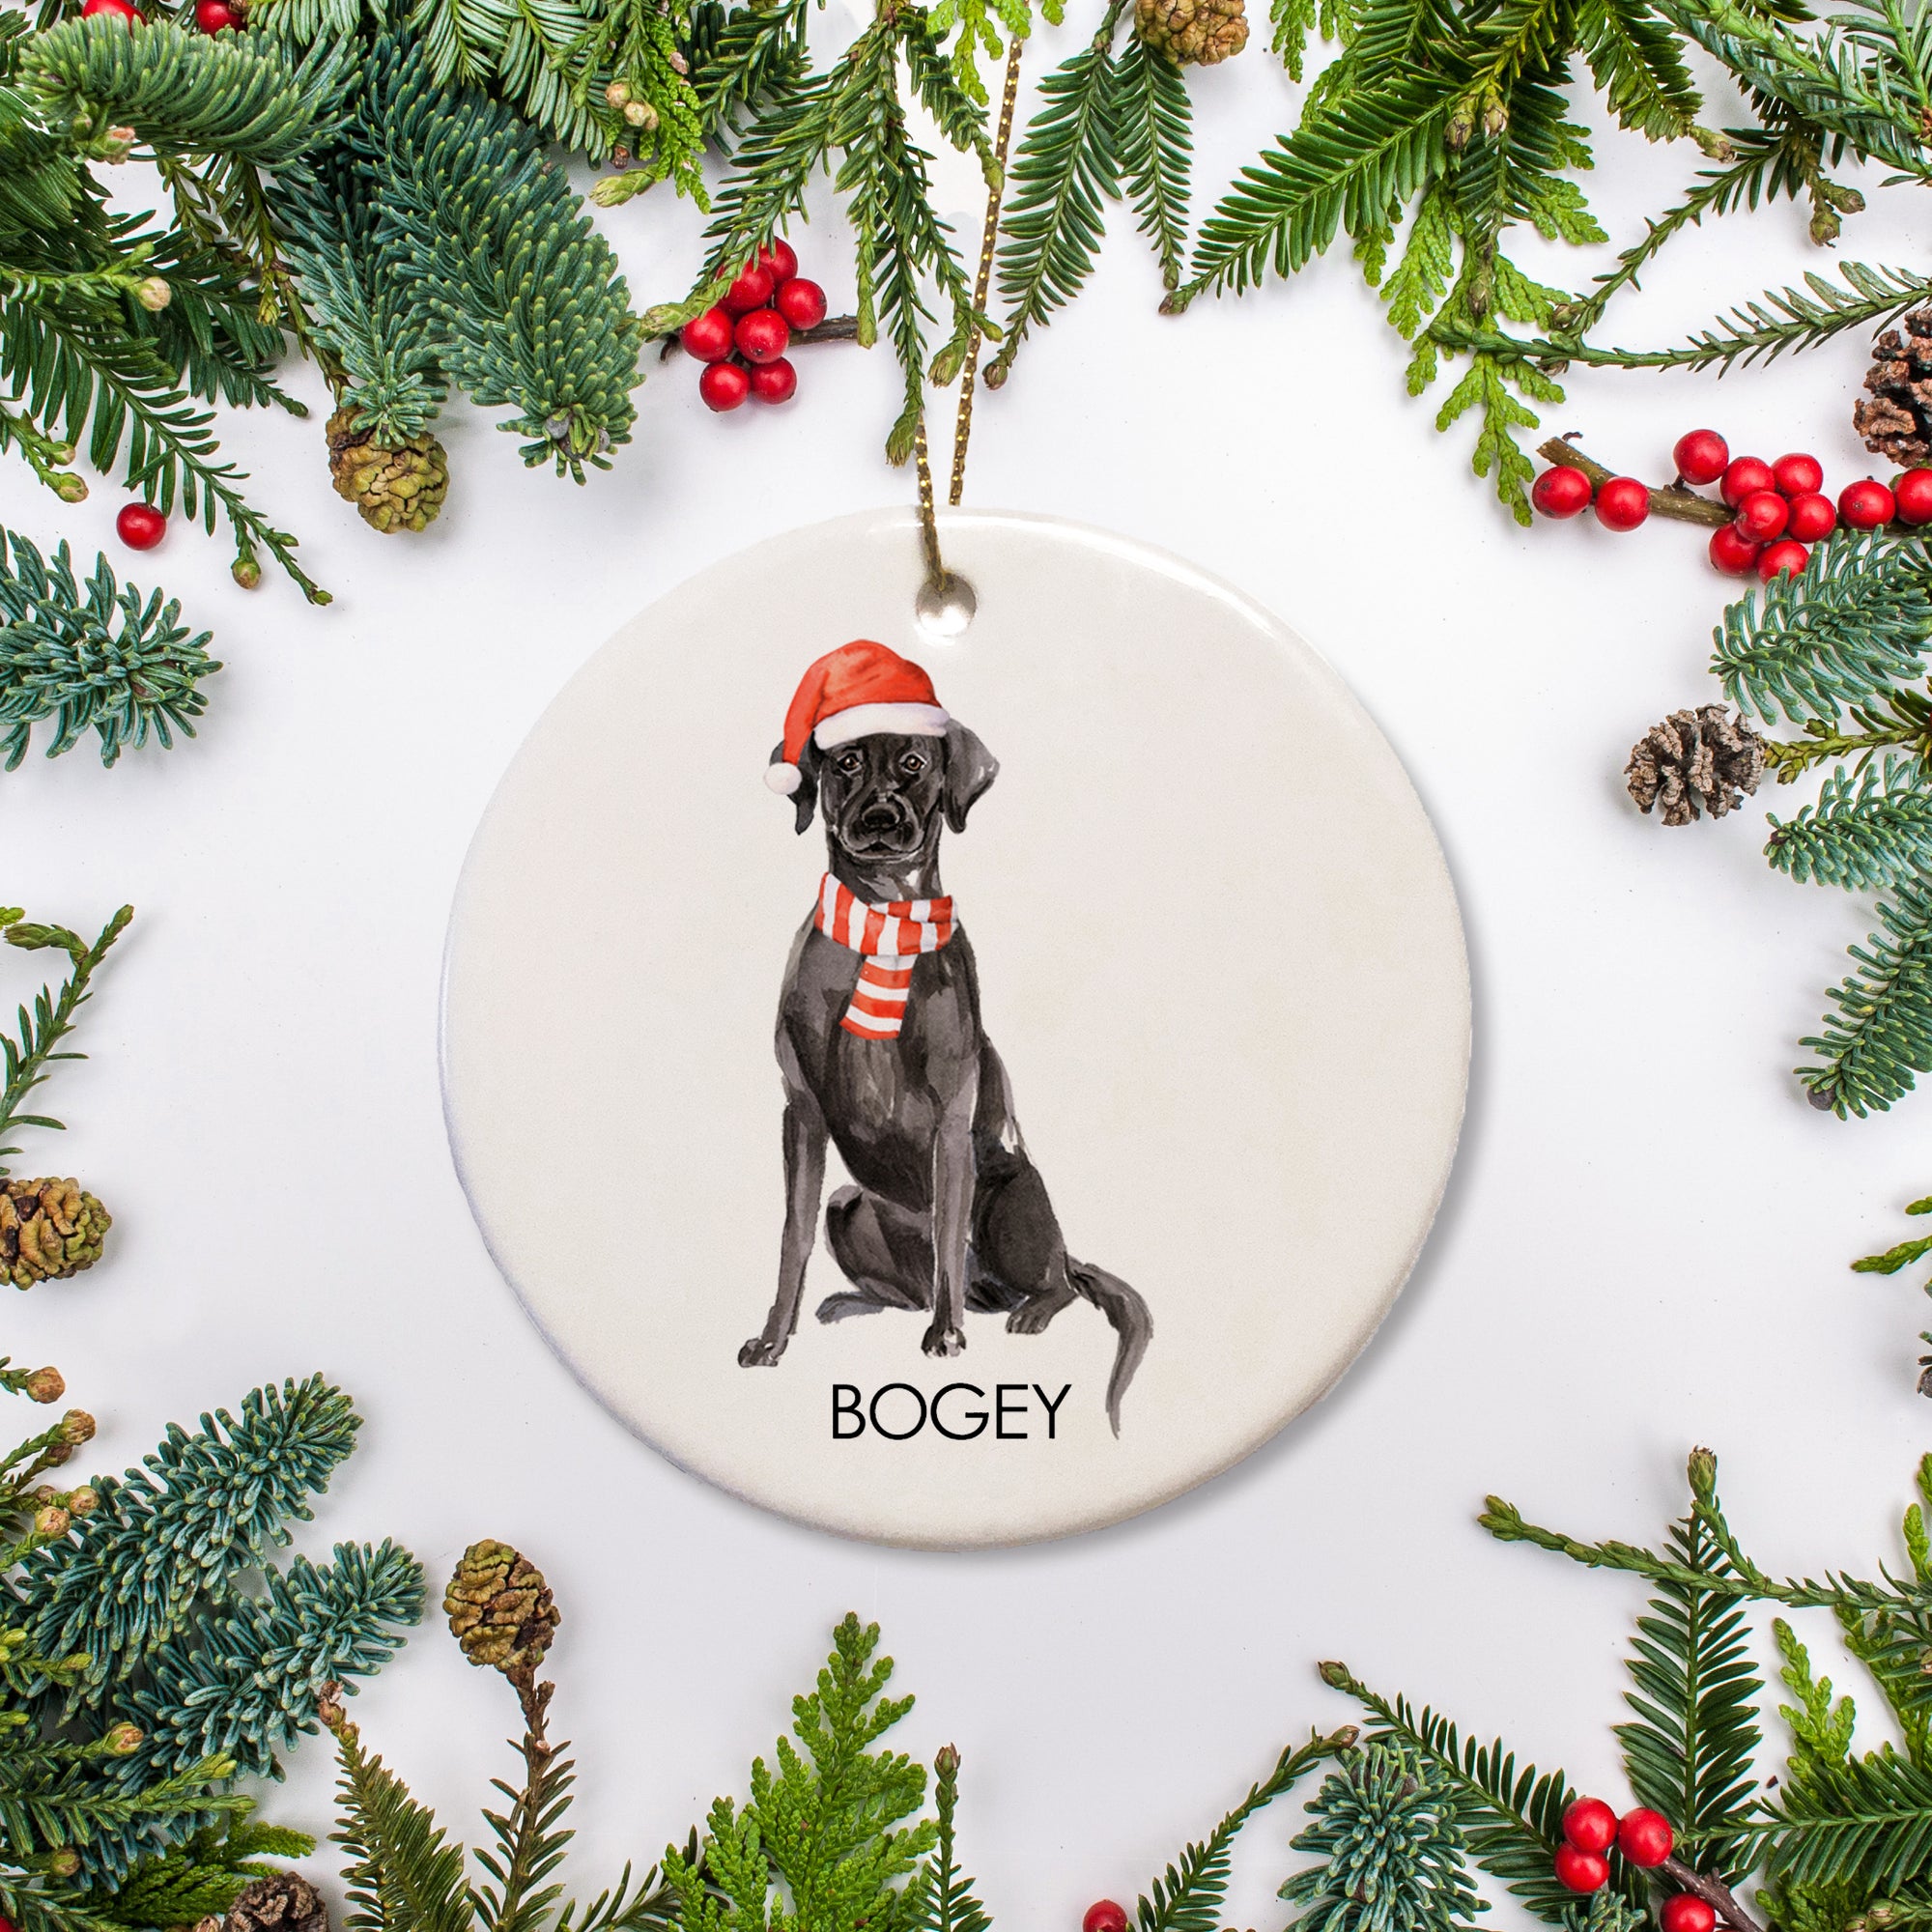 This personalized ornament features a black Labrador Retriever in a Santa hat and scarf, along with your dog's name. We can add a special message on the back, such as an adoption date or your a list of their favorite activities.